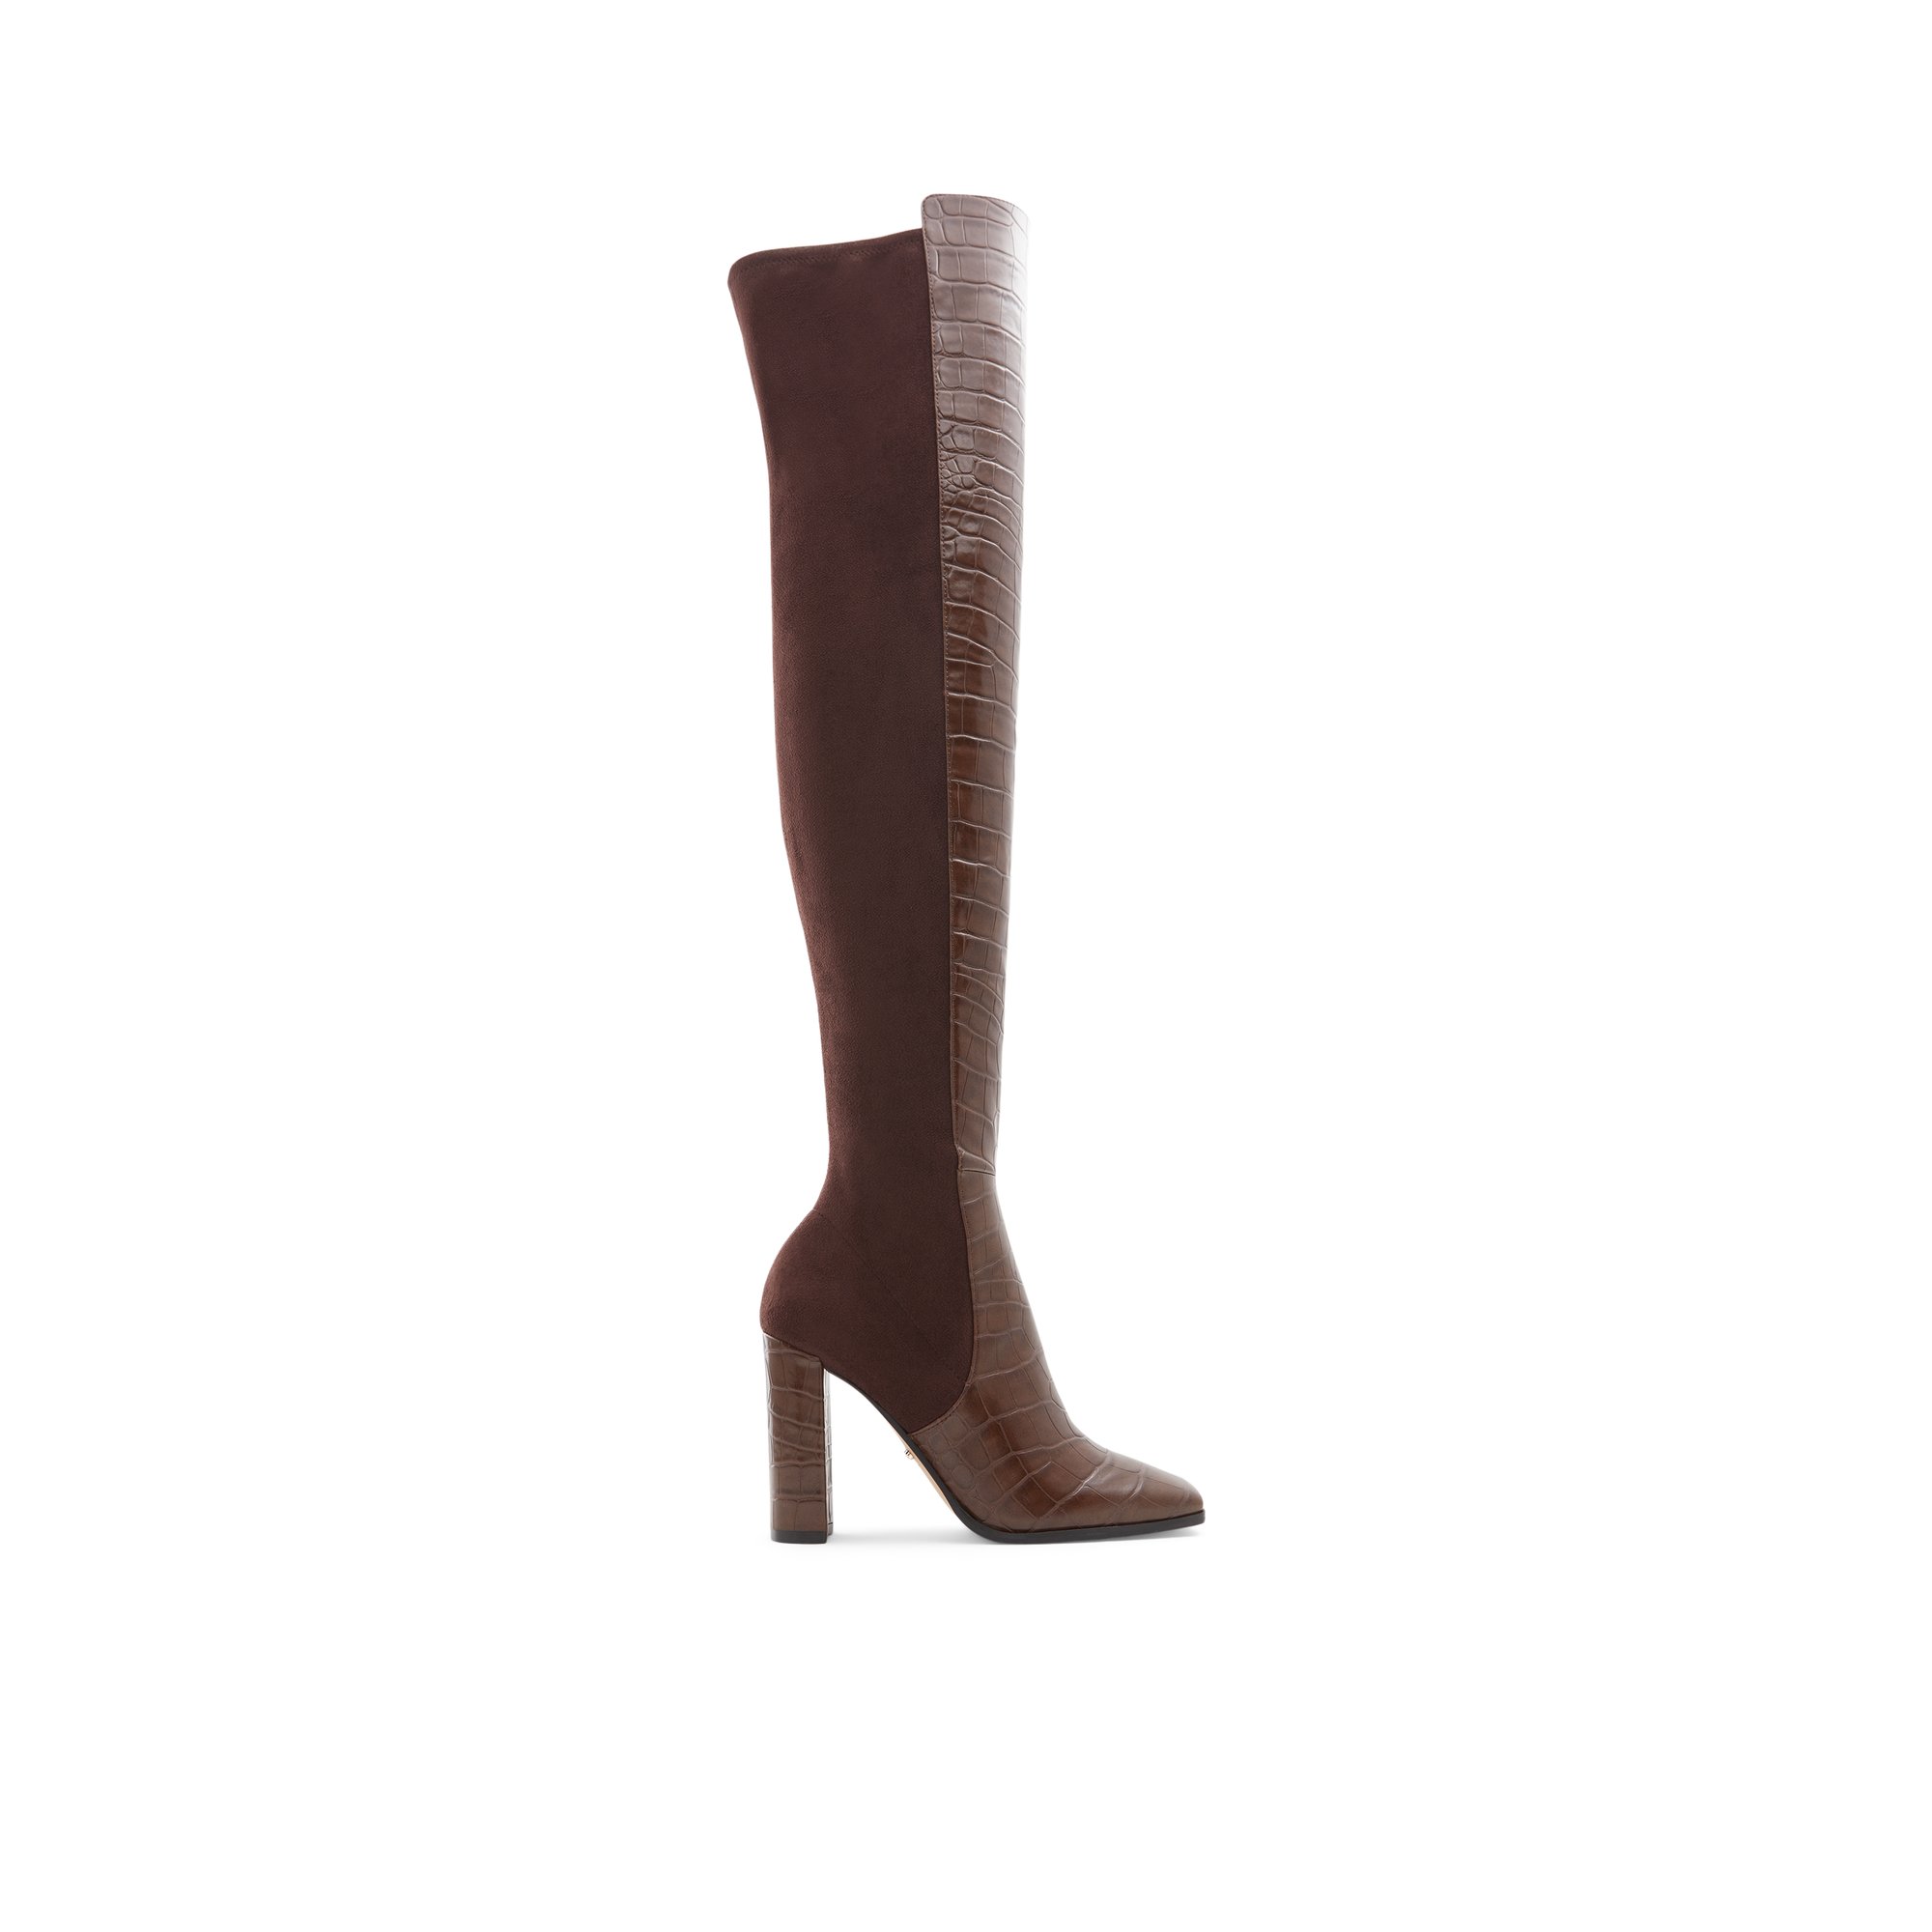 Image of ALDO Choan - Women's Over-The-Knee Boot - Brown, Size 5